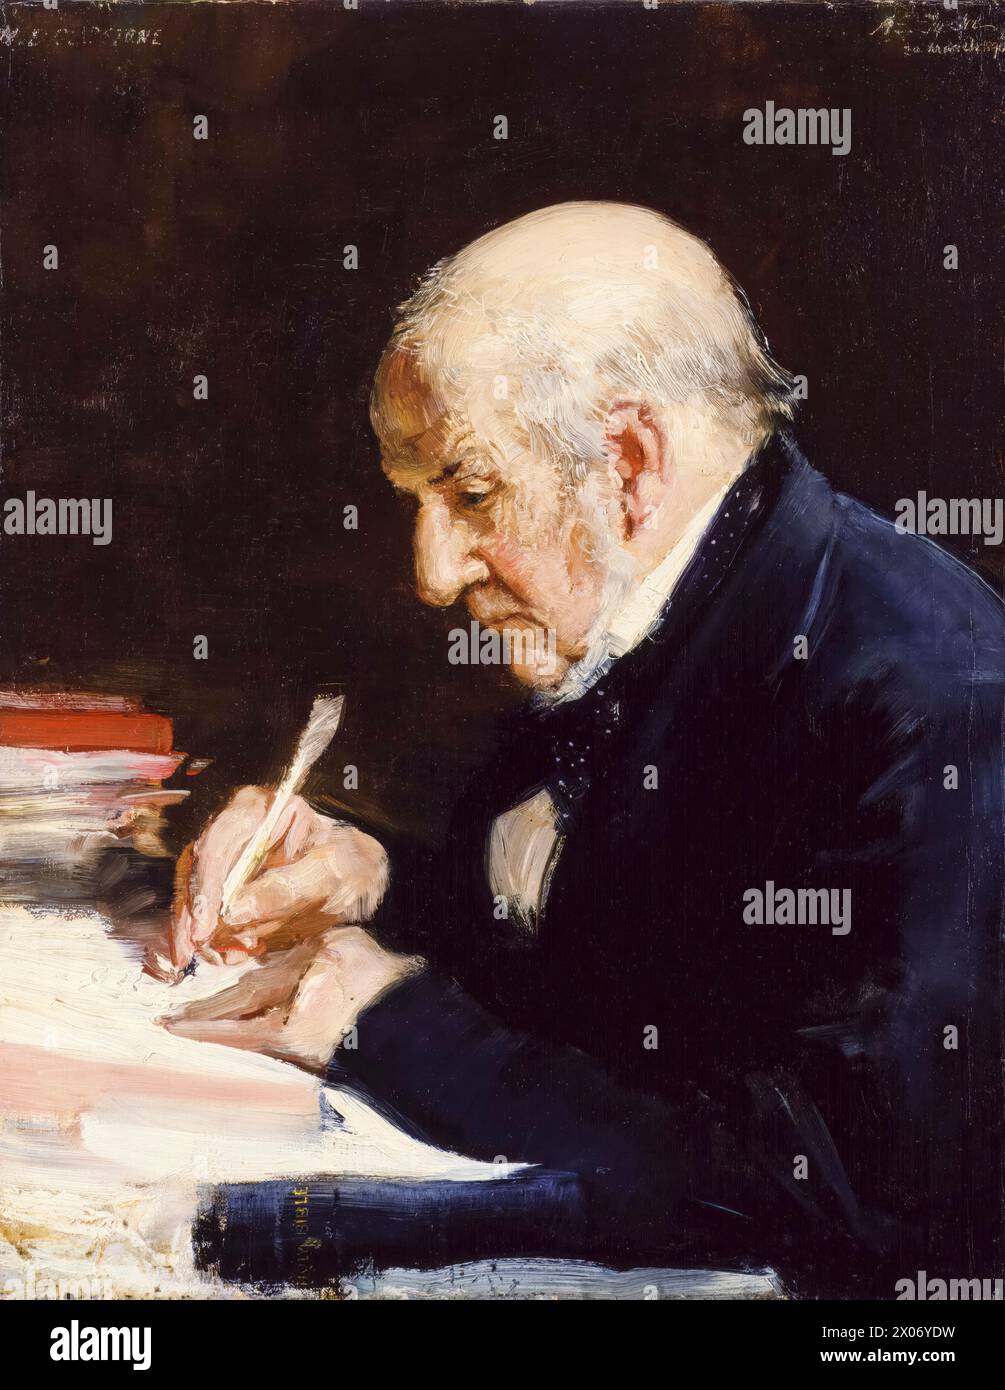 William Gladstone (William Ewart Gladstone, 1809-1898), Liberal politician and four times Prime Minister of the United Kingdom 1868-1874, 1880-1885, Feb-Jul 1886, and 1892-1894, portrait painting in oil on canvas by Alfred Edward Emslie, 1890 Stock Photo